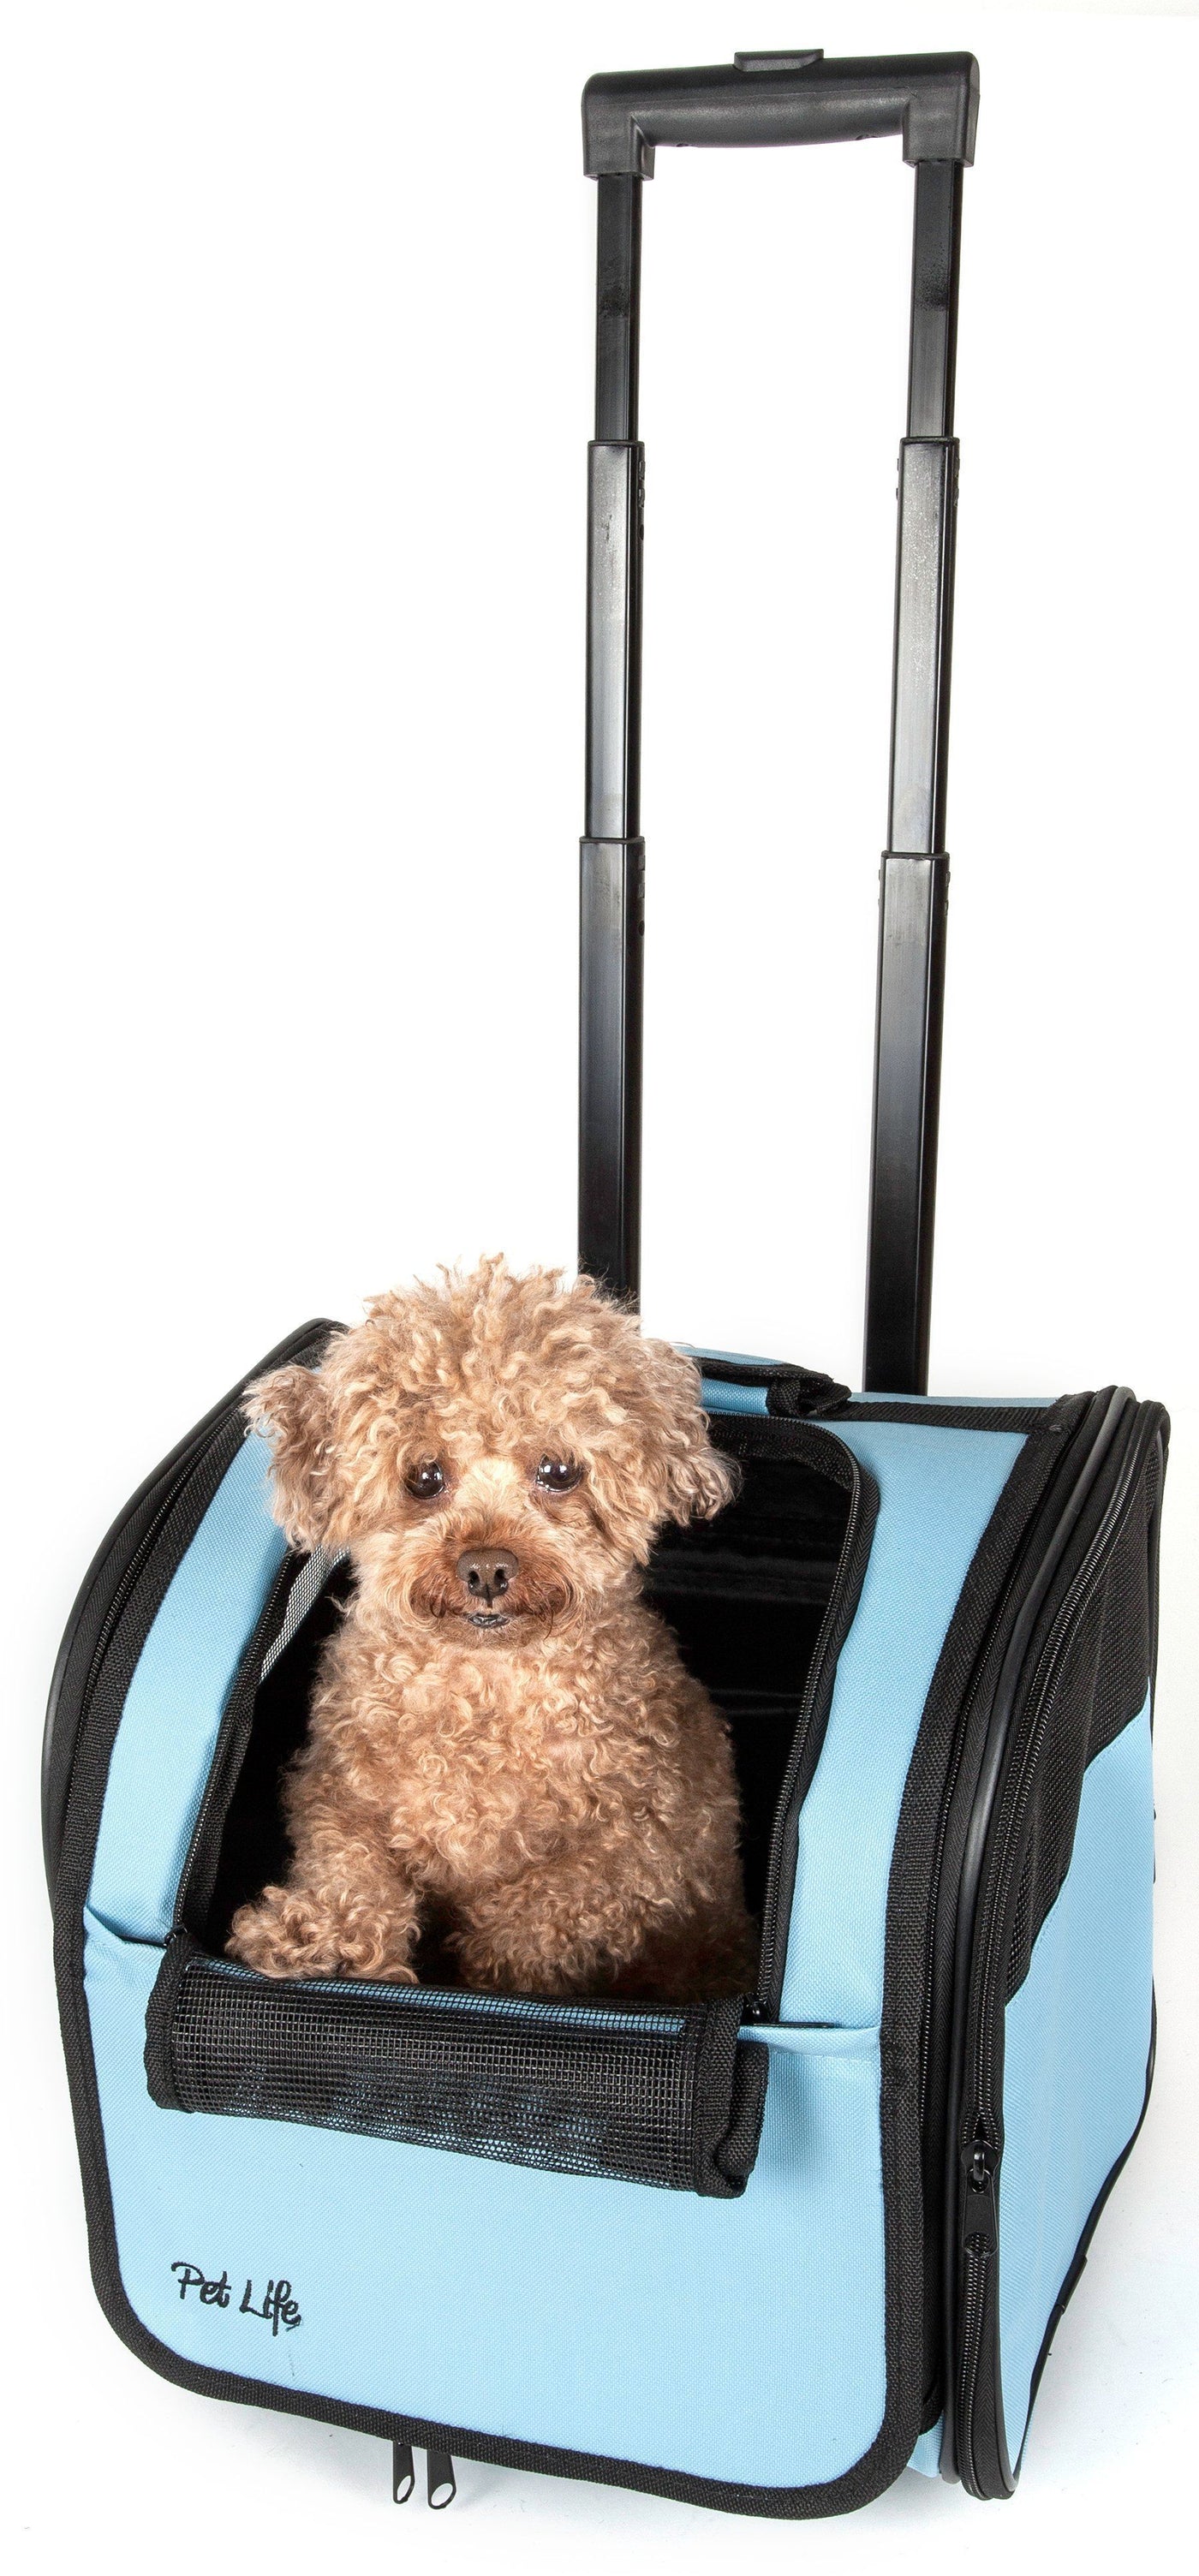 The Wild One Air Travel Dog Carrier Is Lightweight but Loaded With Extras